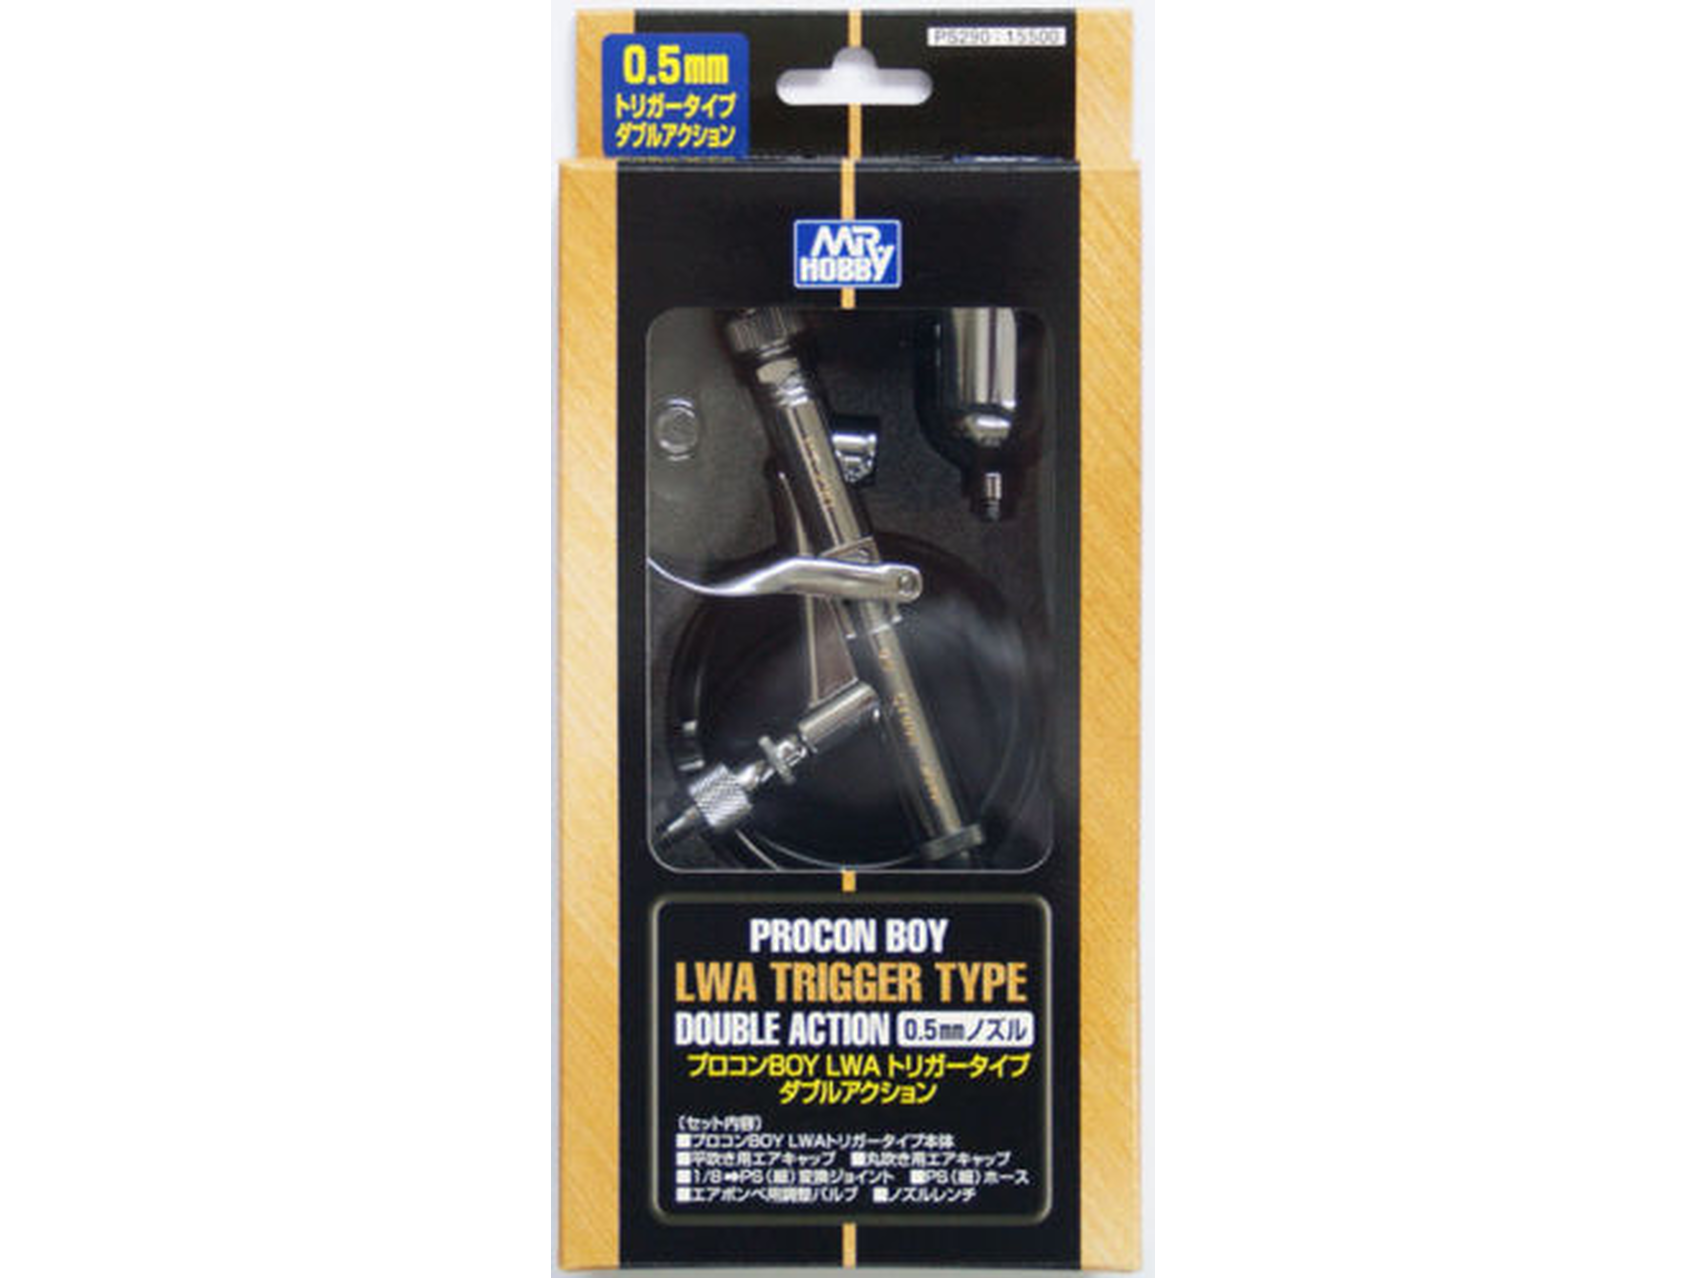 Mr. Procon Boy LWA Trigger Type 0.5 mm, PS-290 Airbrushes  Airbrushing Tools  Materials Eshop